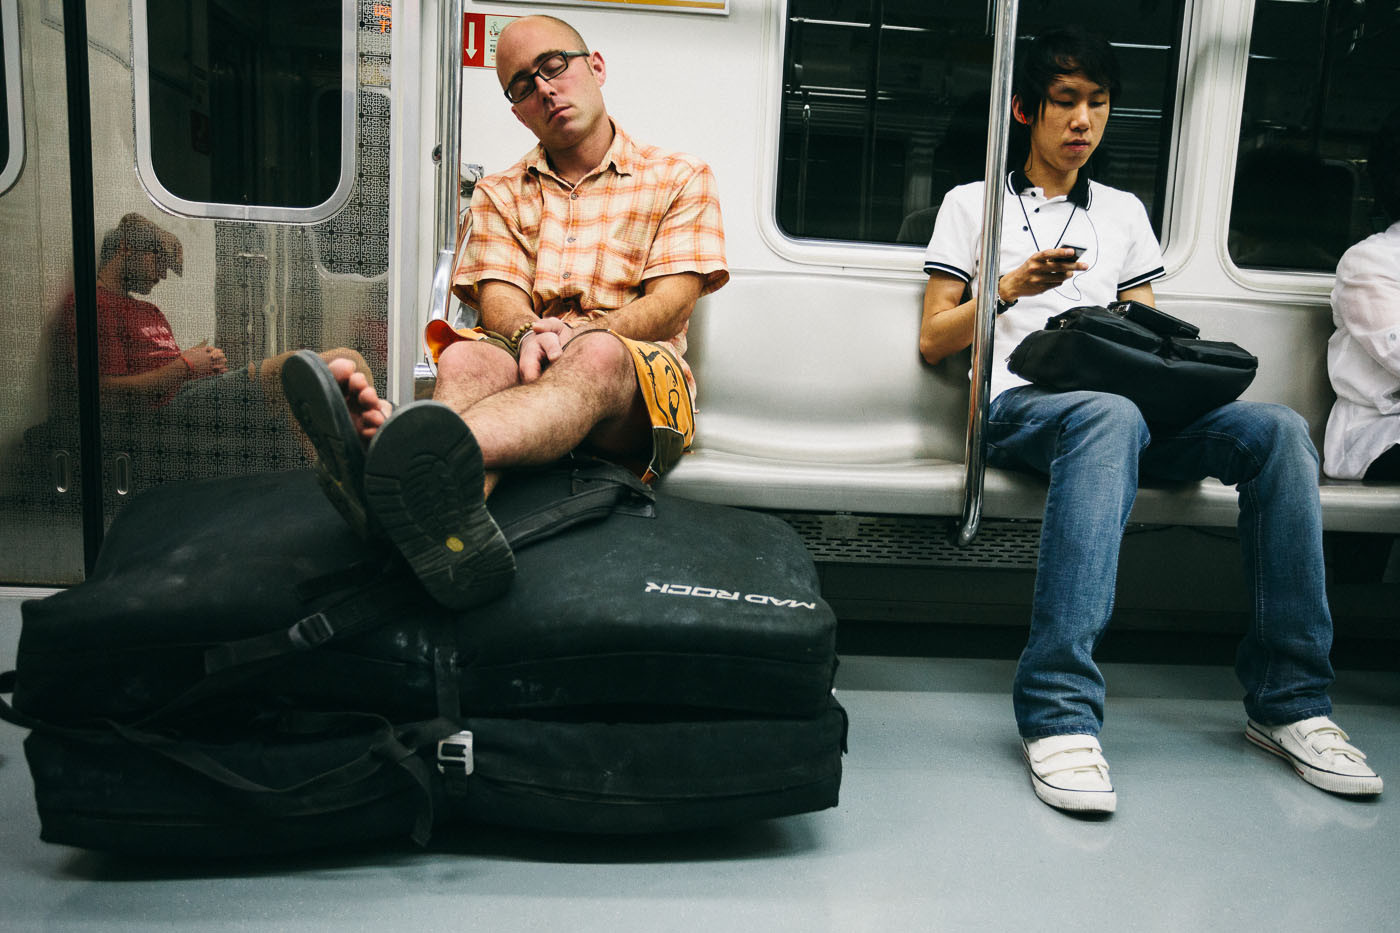 Dave McAllister rides the subway in Seoul, South Korea